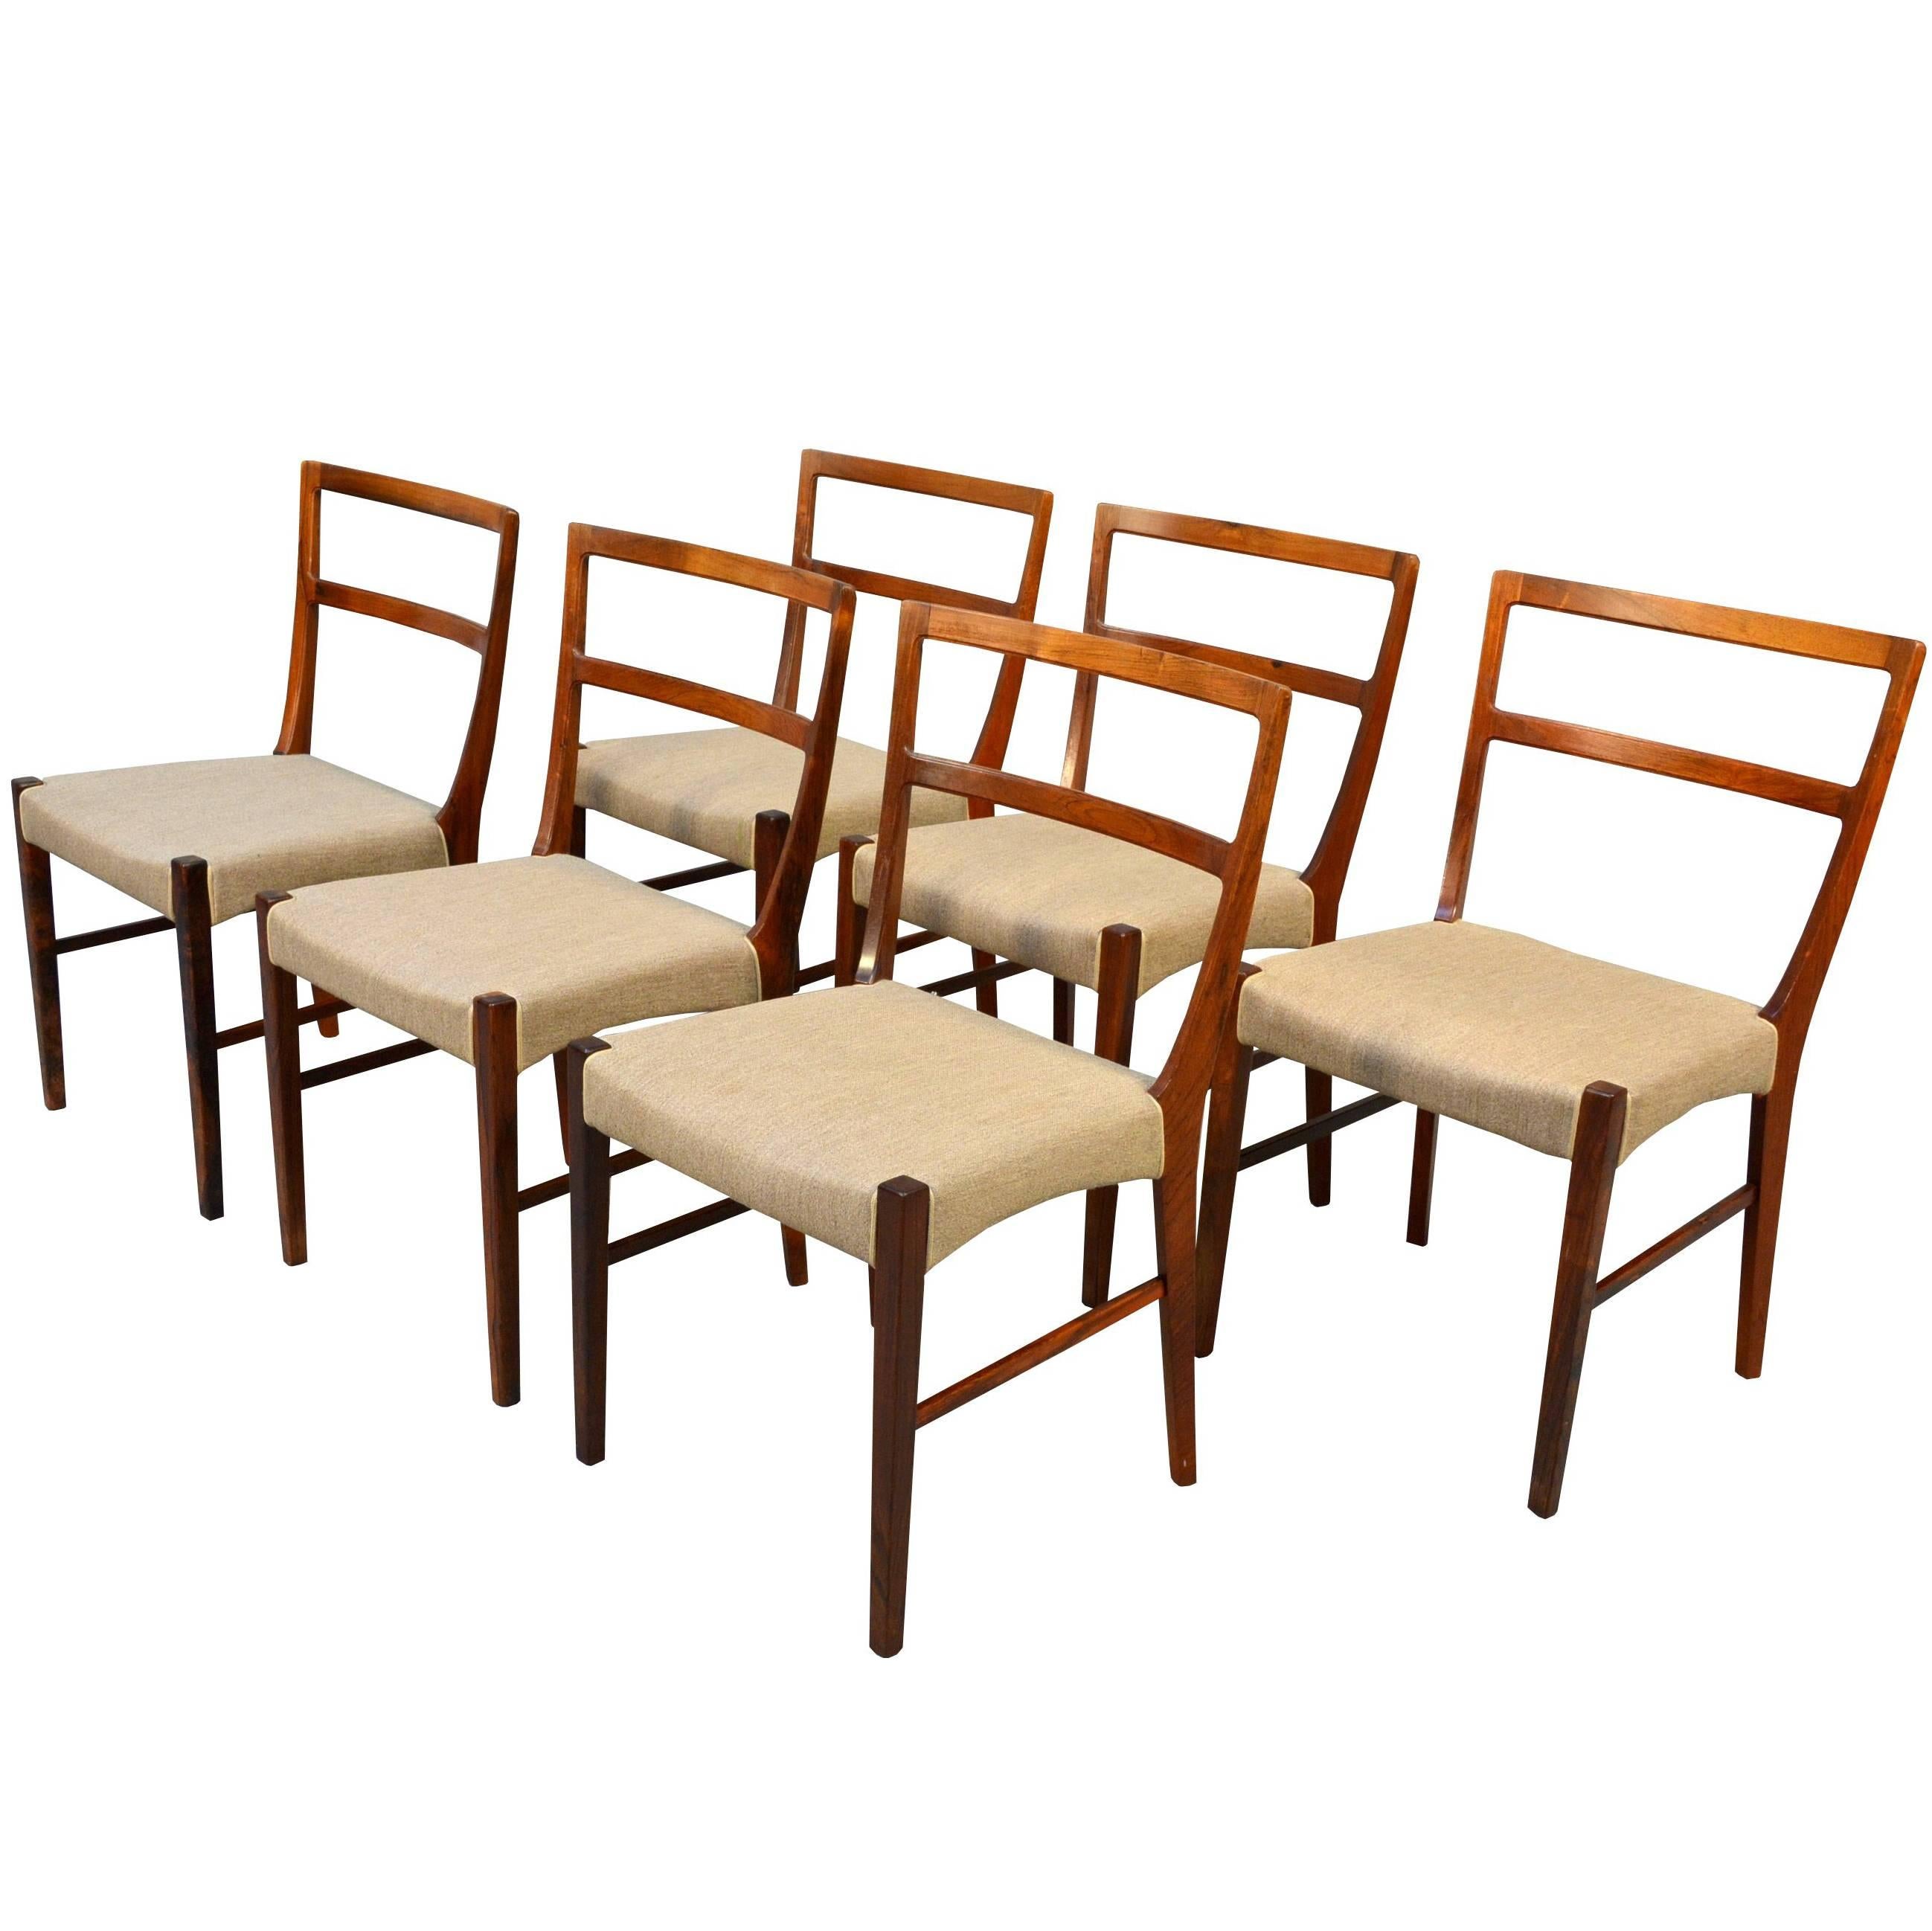 Mid-Century Modern Chairs by Johannes Andersen in Rosewood